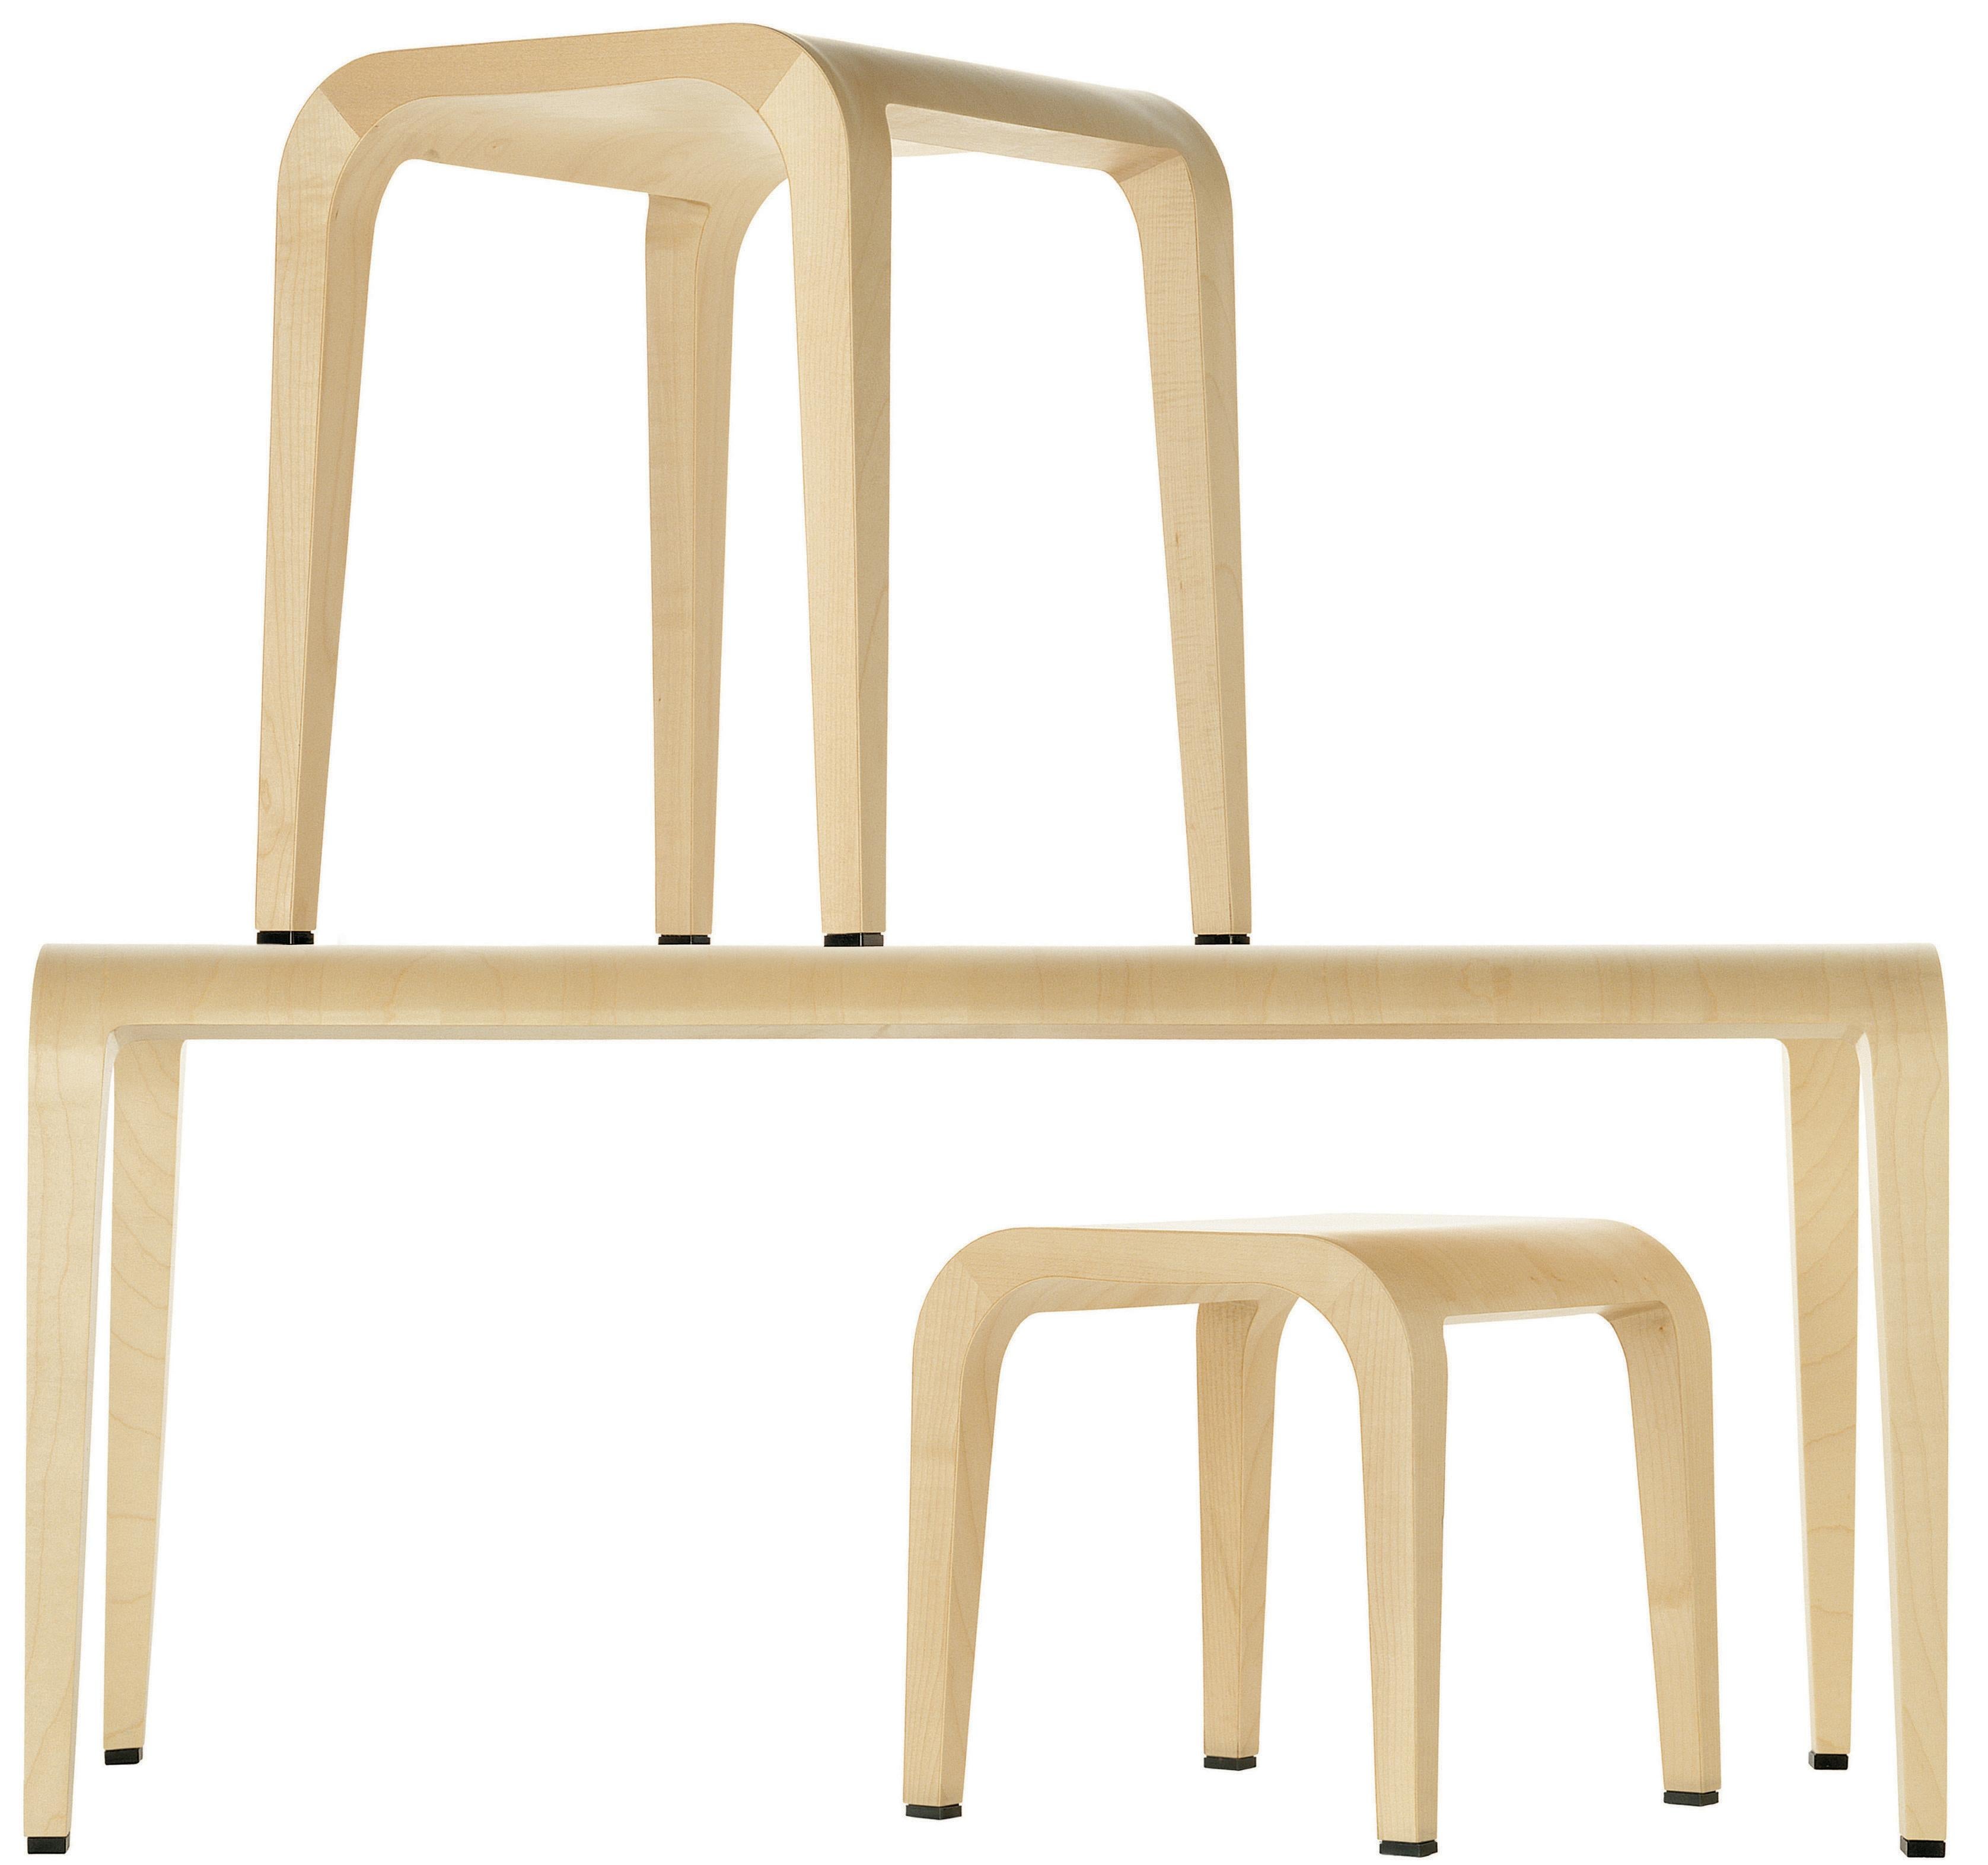 Alias 310 Laleggera Stool in Whitened Oak Frame by Riccardo Blumer

Stool with structure in solid maple or ash. Maple veneer or oak veneer. Internal support in injected polyurethane foam. Finish in transparent laquage or in colored stains.

Born